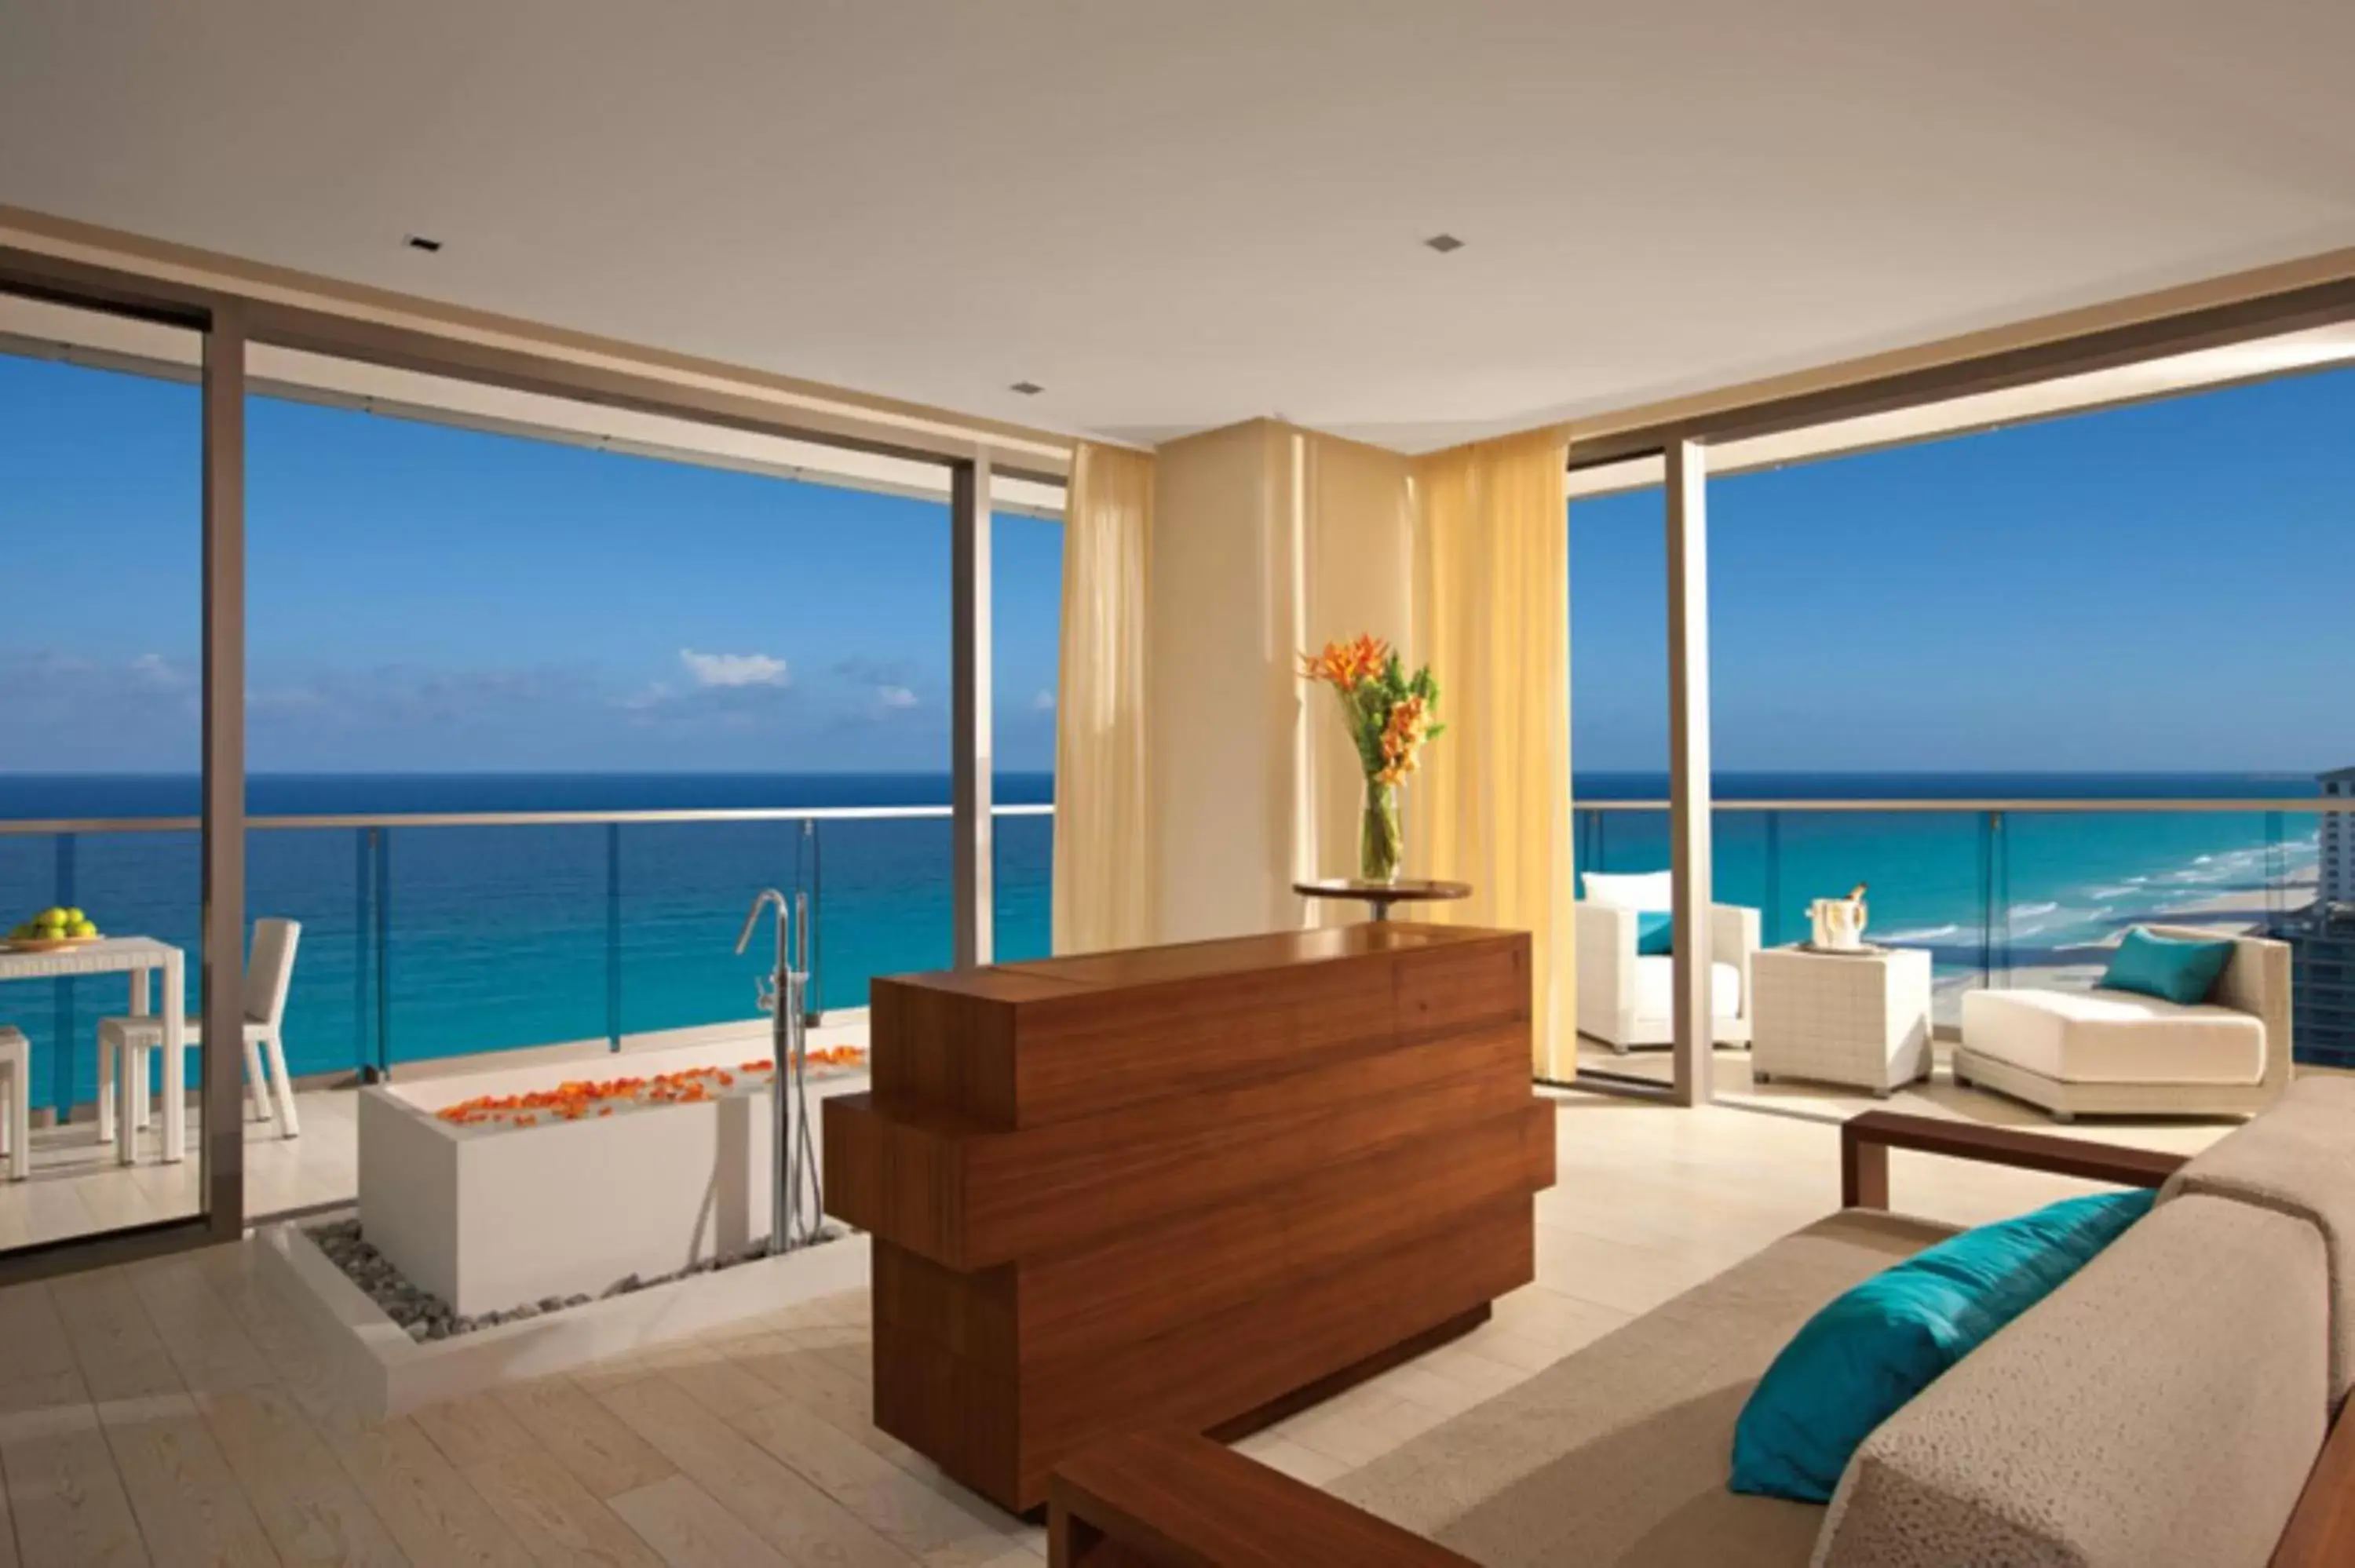 Sea View in Secrets The Vine Cancun - All Inclusive Adults Only